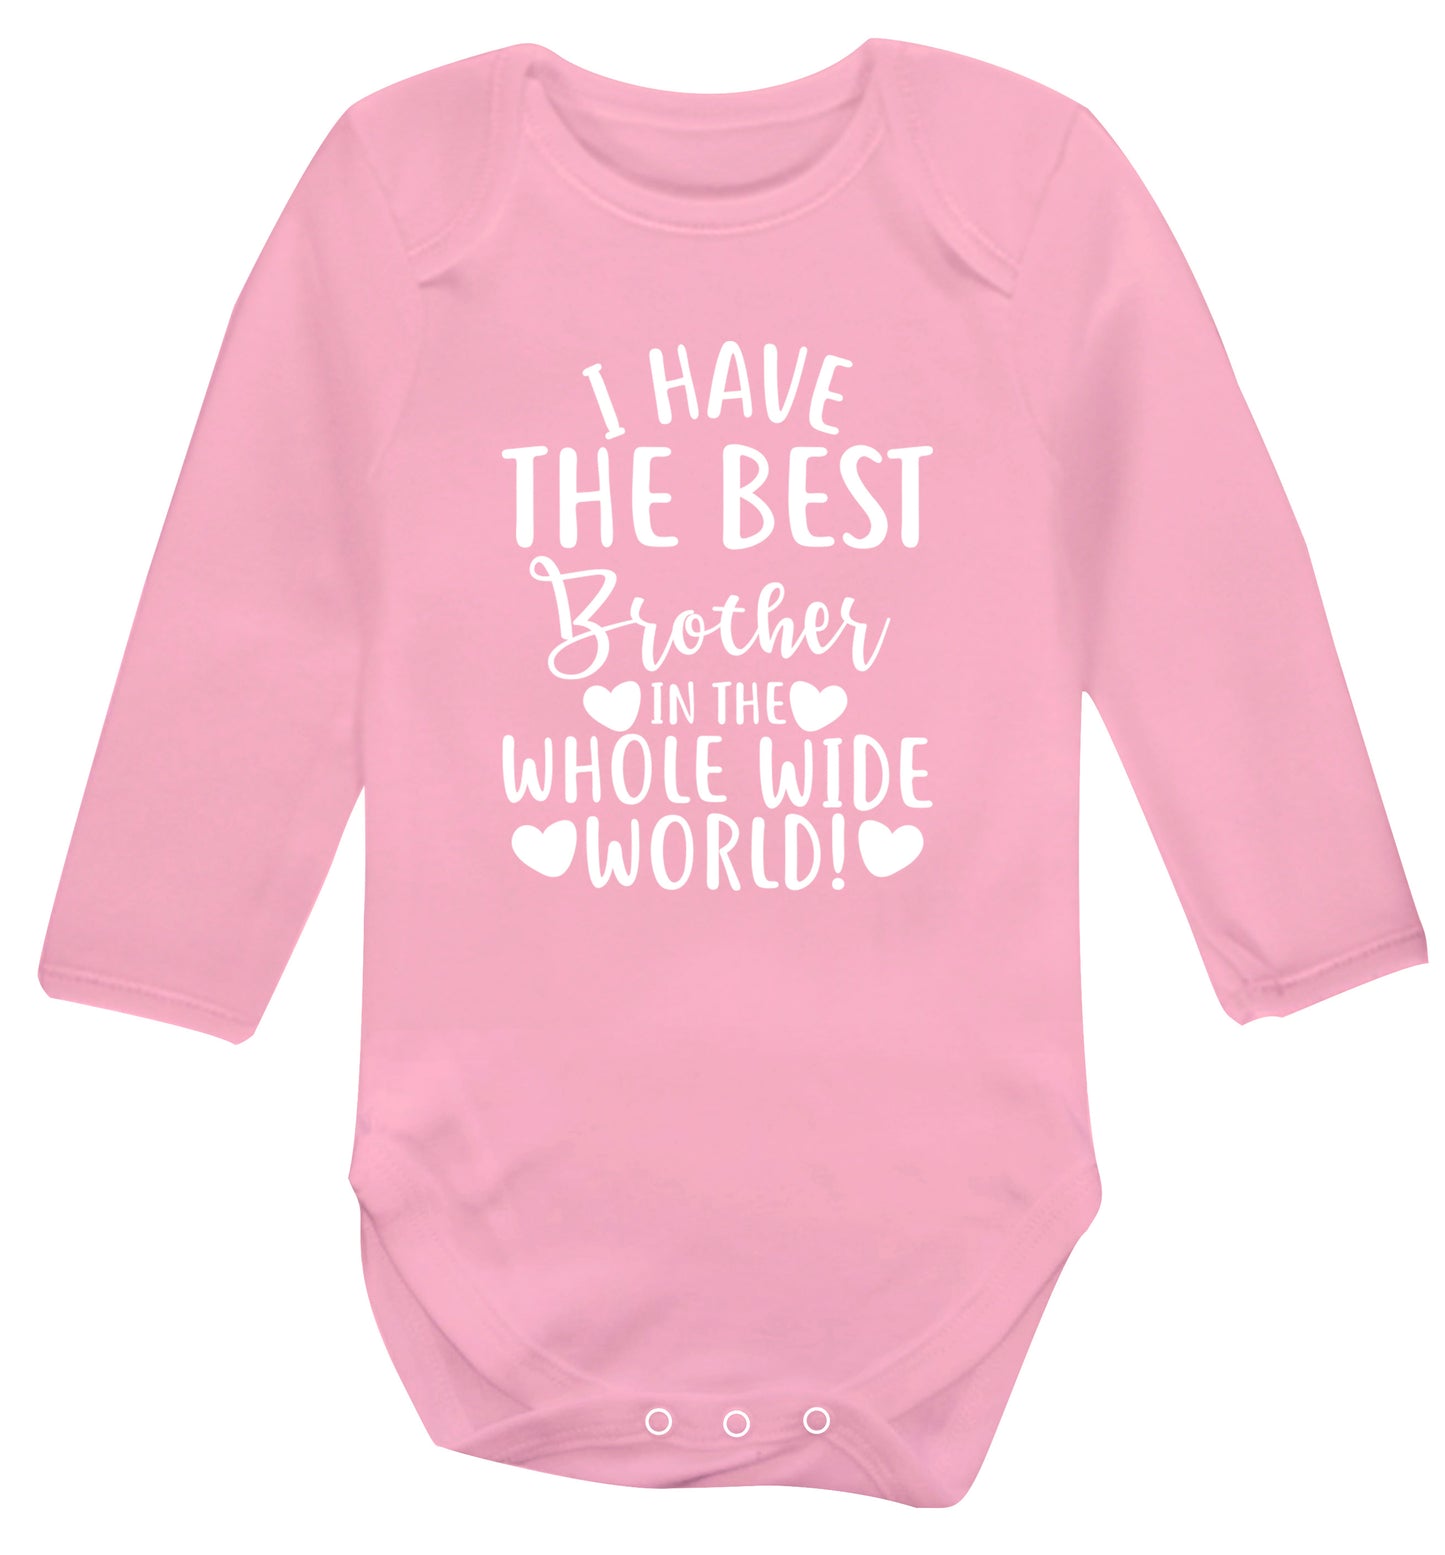 I have the best brother in the whole wide world! Baby Vest long sleeved pale pink 6-12 months